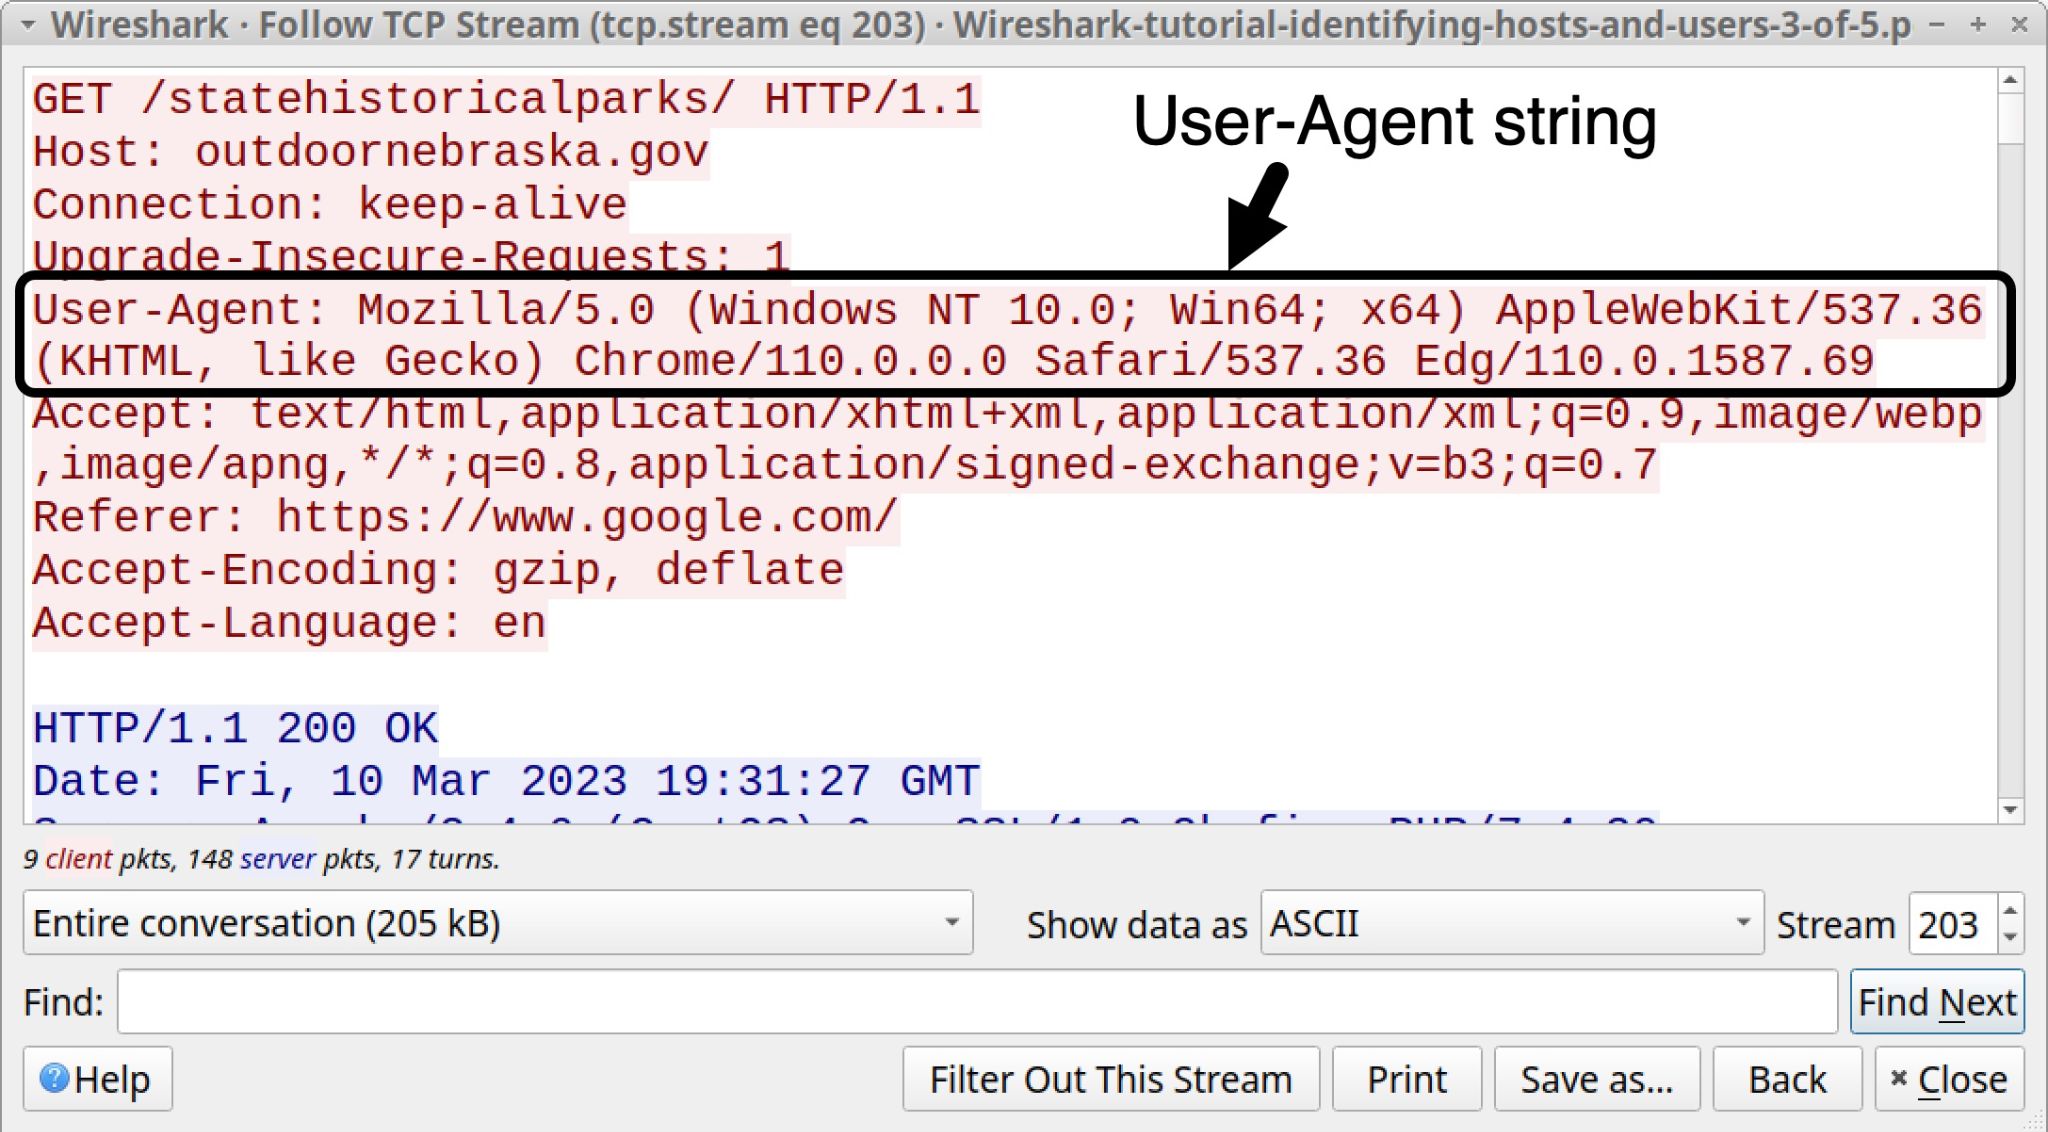 Image 10 is a screenshot of the Wireshark TCP stream window. Highlighted by a black rectangle and an arrow is the User-Agent string. 